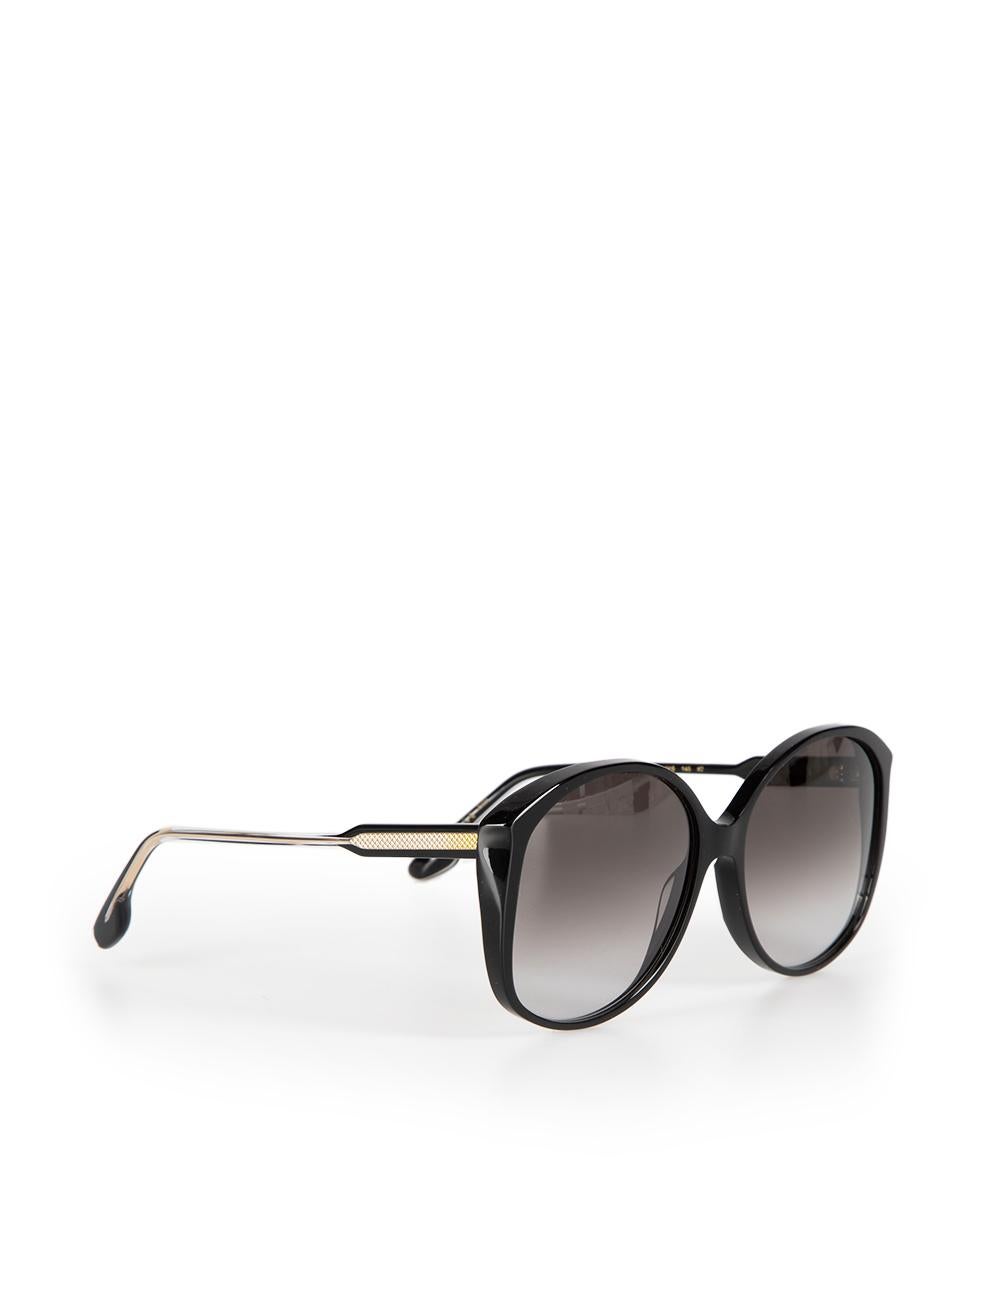 Victoria Beckham Black Round Gradient Sunglasses In New Condition For Sale In London, GB